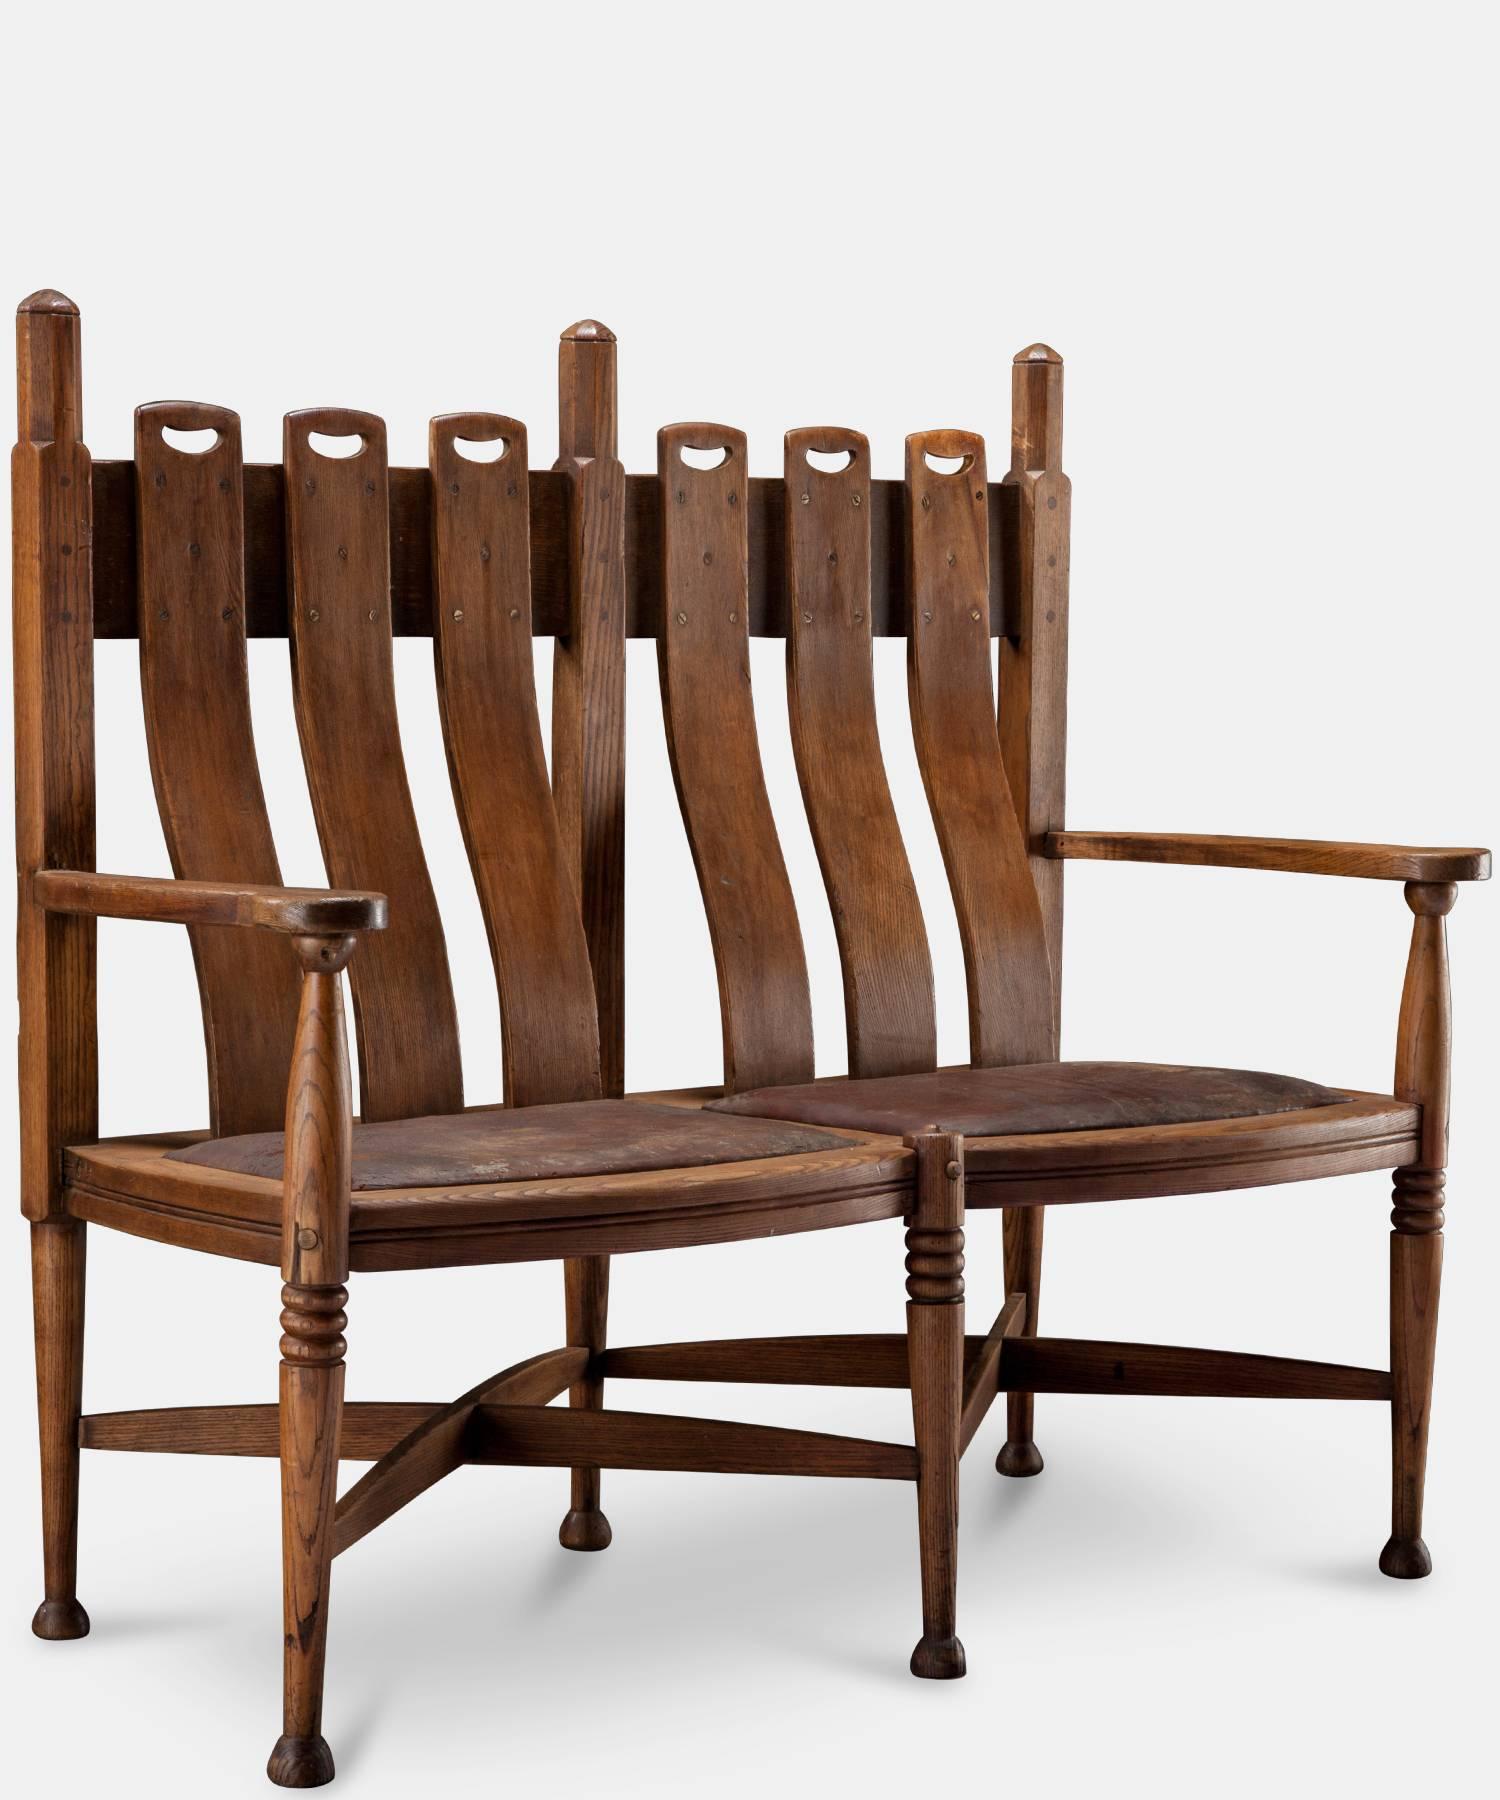 George Walton Oak Settle, England, circa 1905

Oak settle designed by George Walton, produced by William Birch of High Wycombe and retailed by Liberty of London. Incredible original condition, with original brown leather seat squabs.